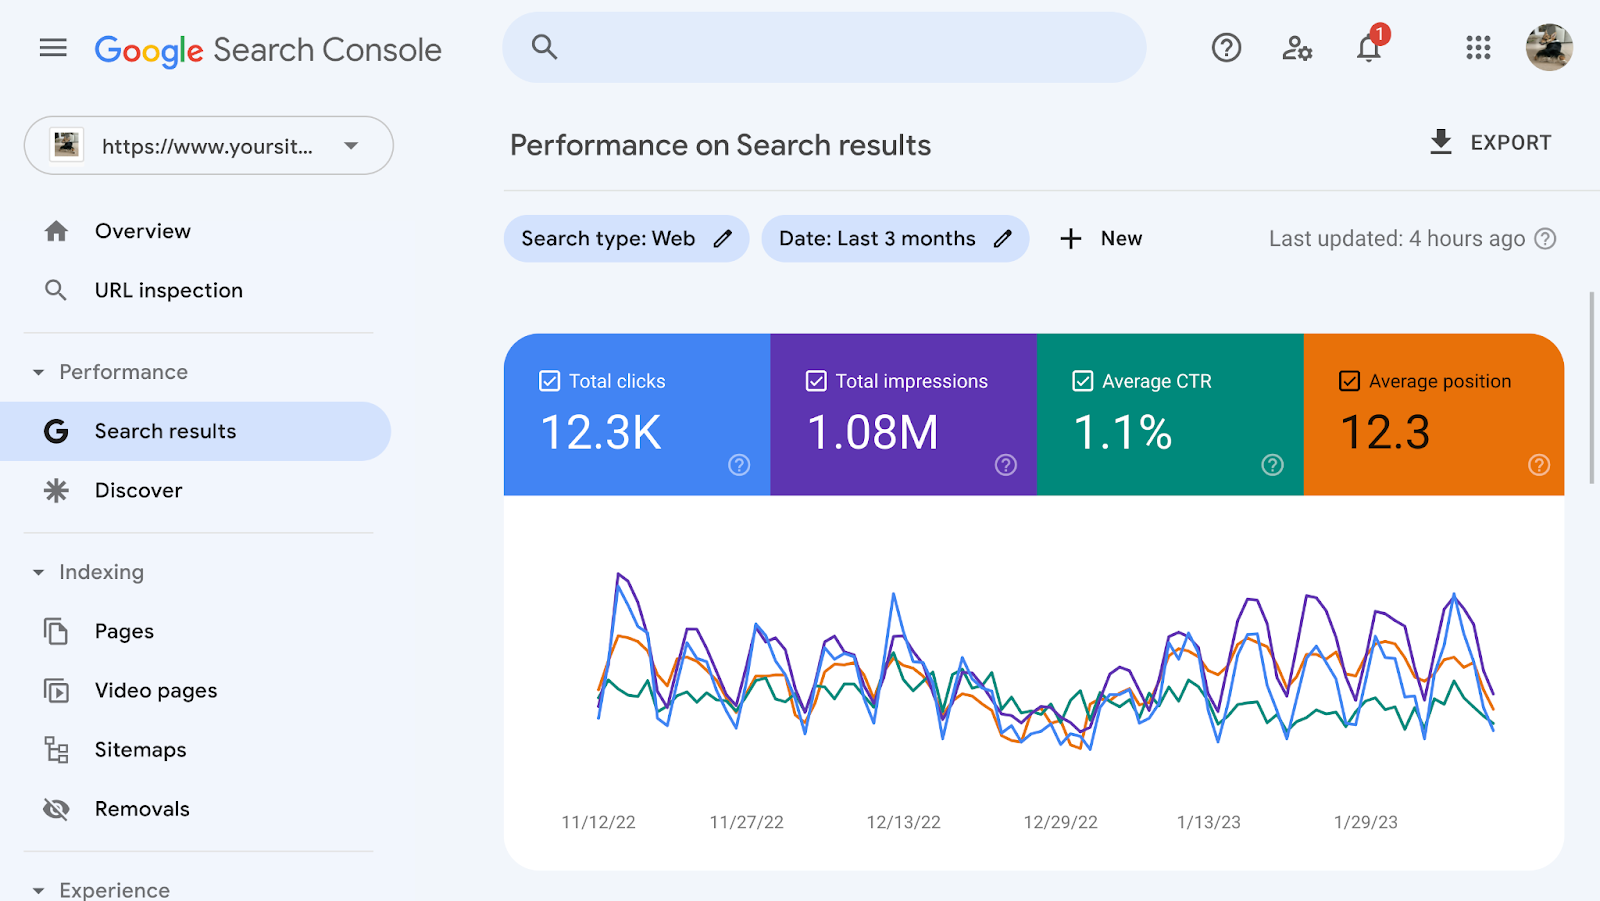 Google Search Console "Performance on search results" graph